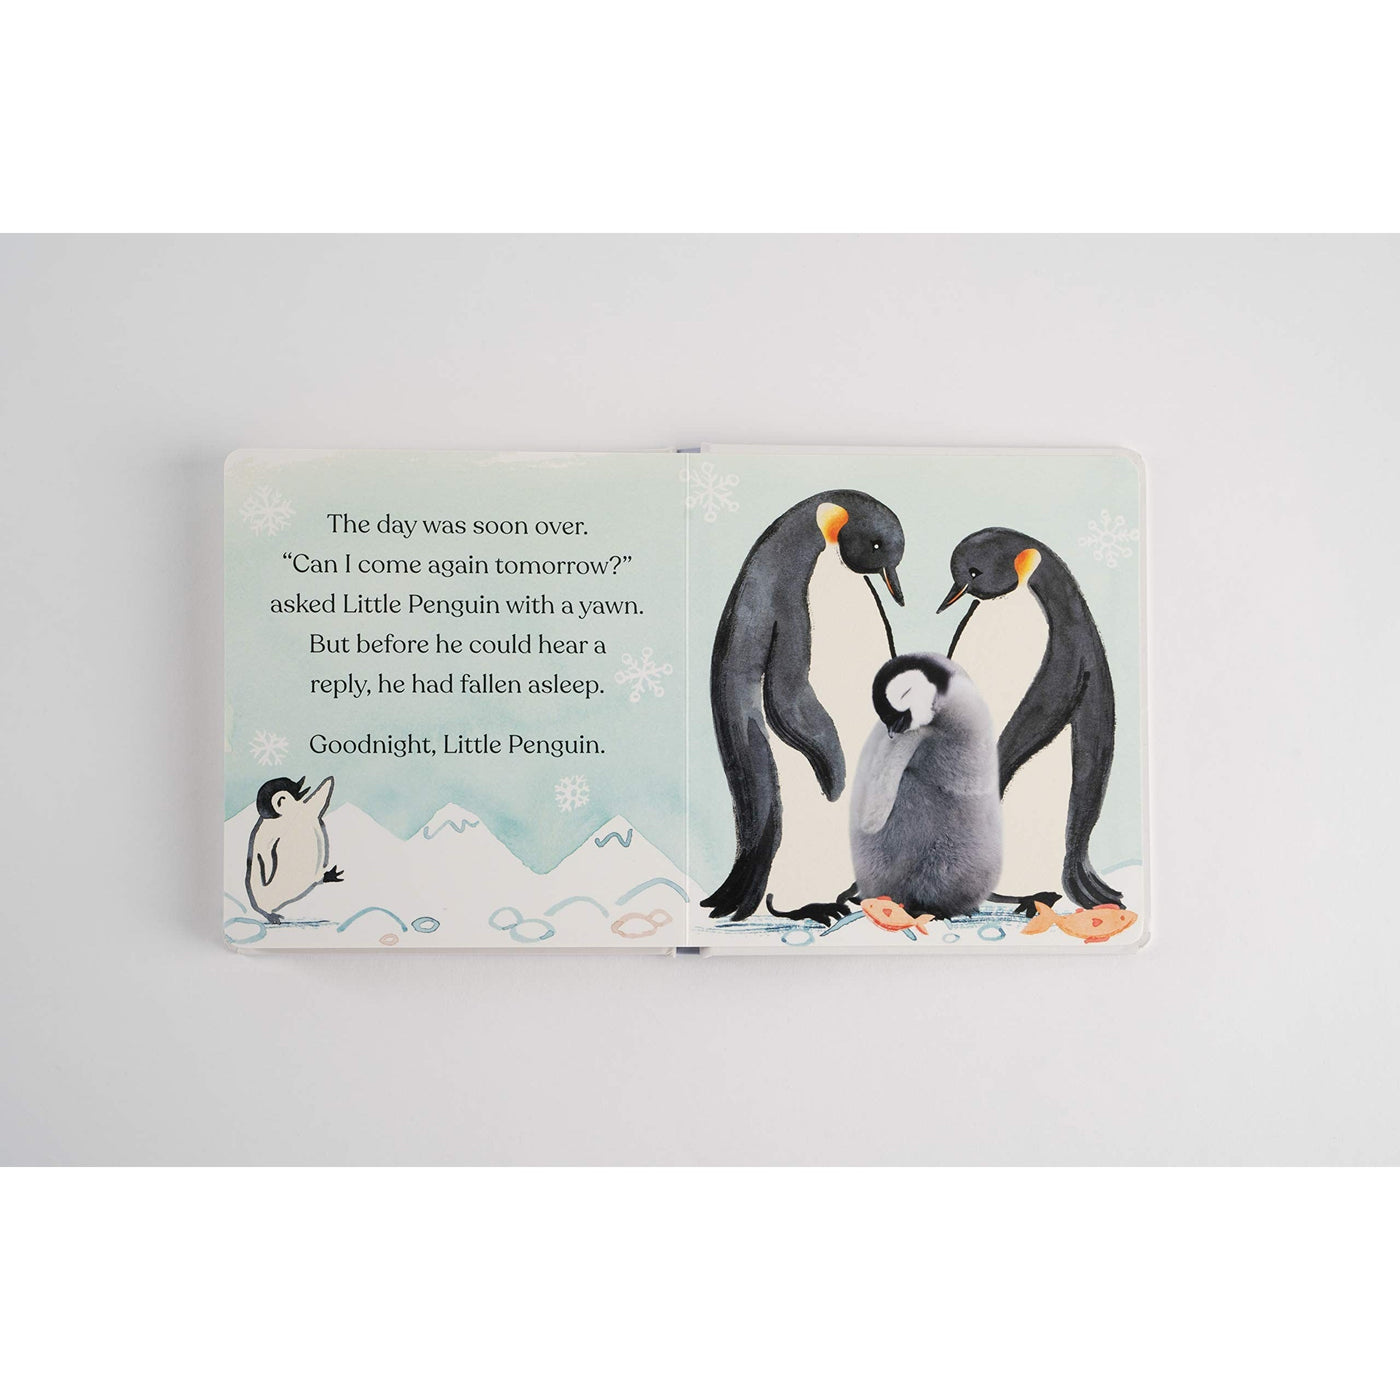 Goodnight, Little Penguin: A Book About Going To Nursery